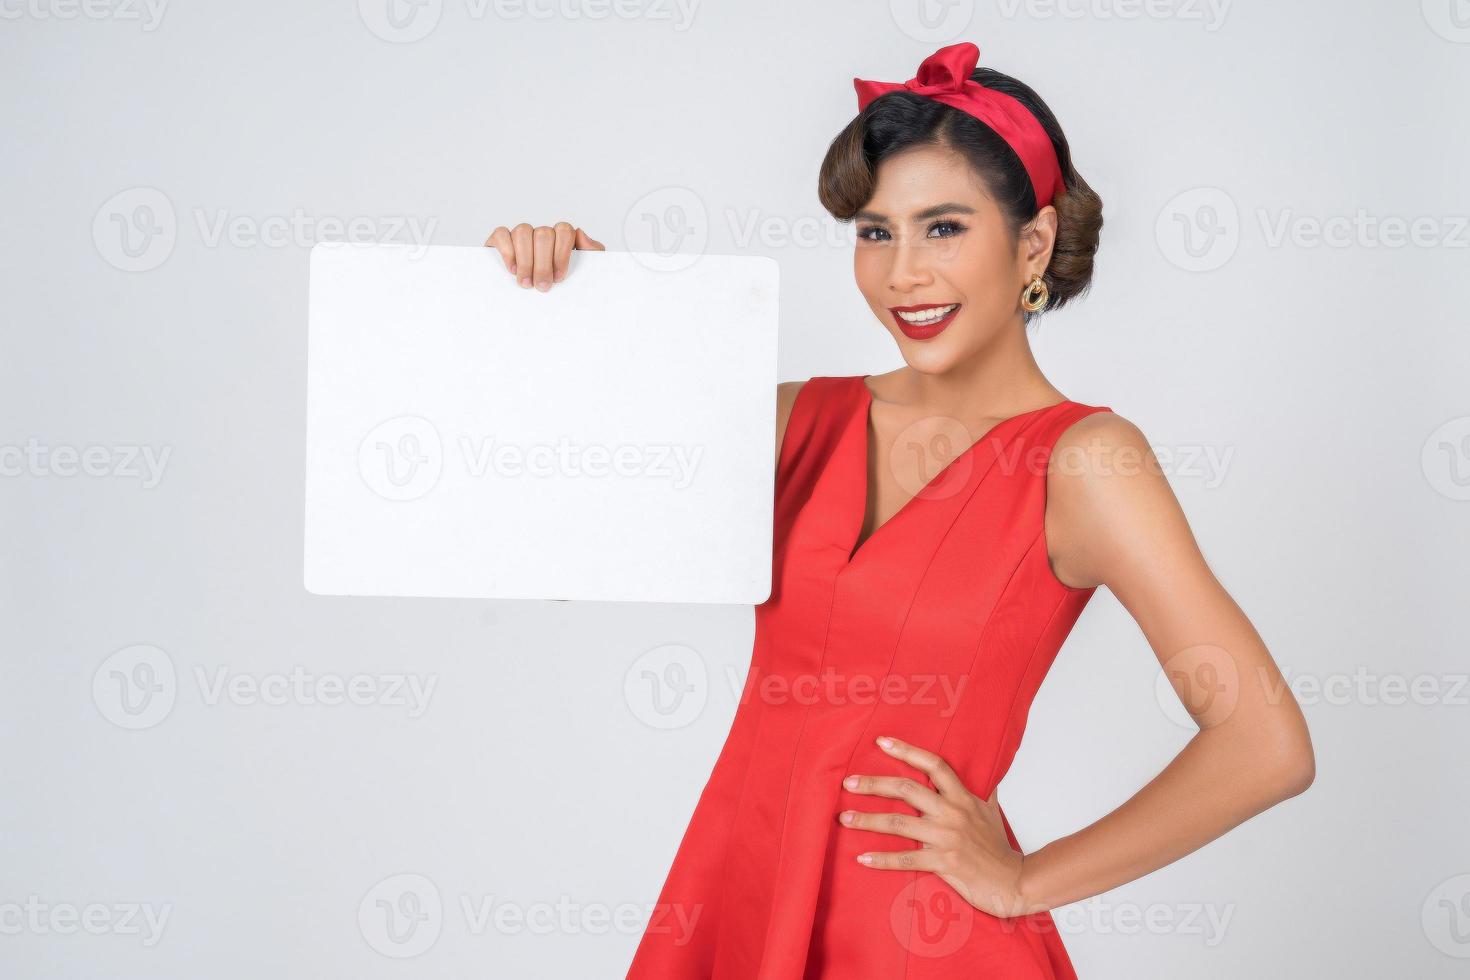 Portrait of a fashionable woman displaying a white banner photo